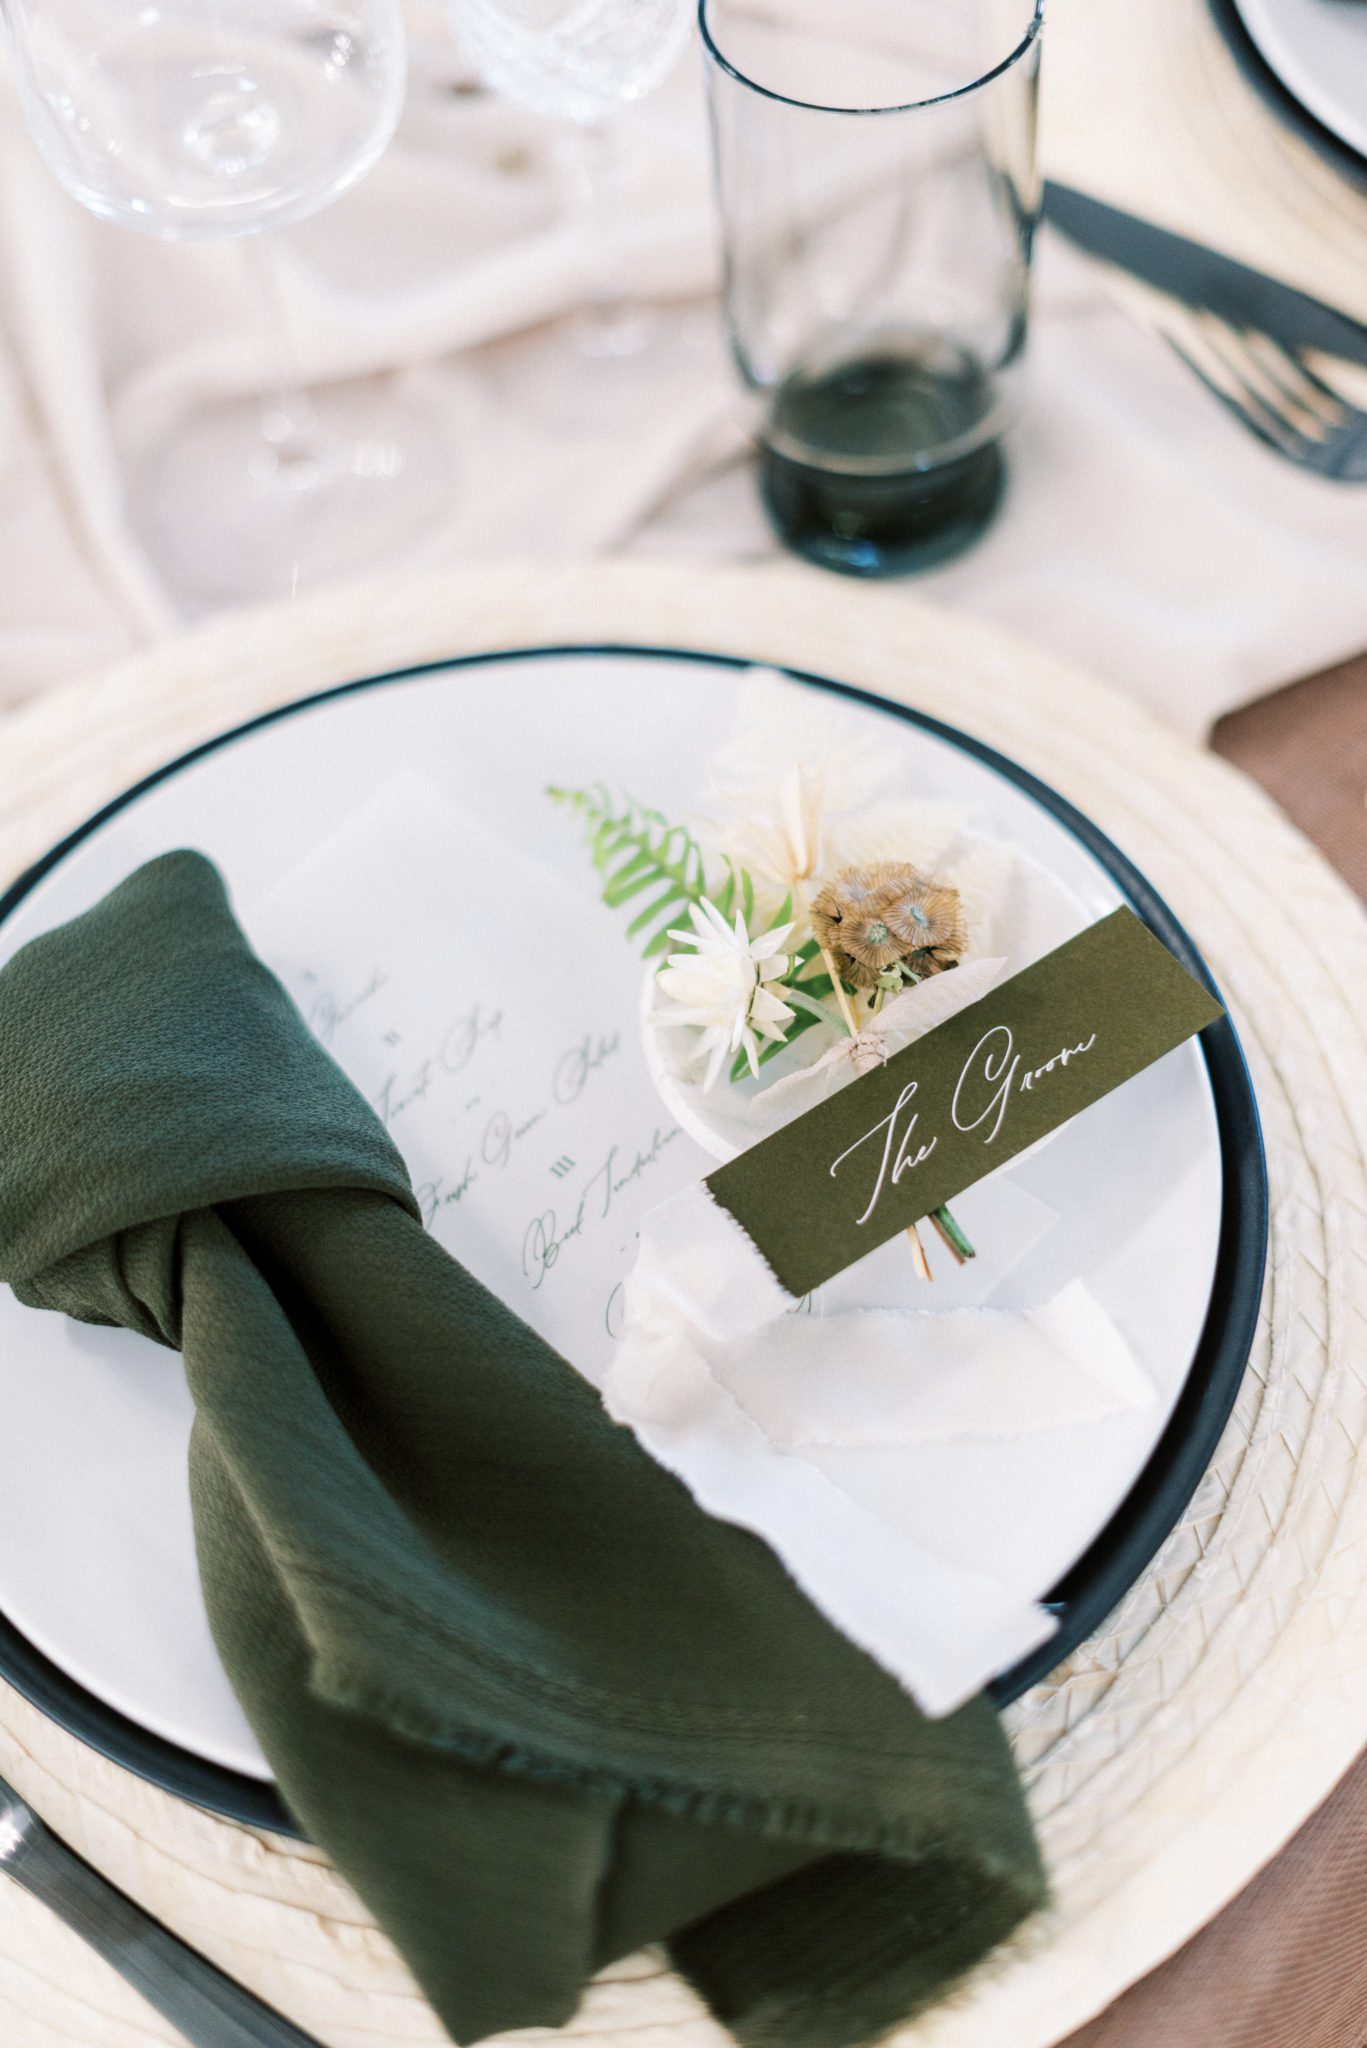 Olive place cards for your wedding reception